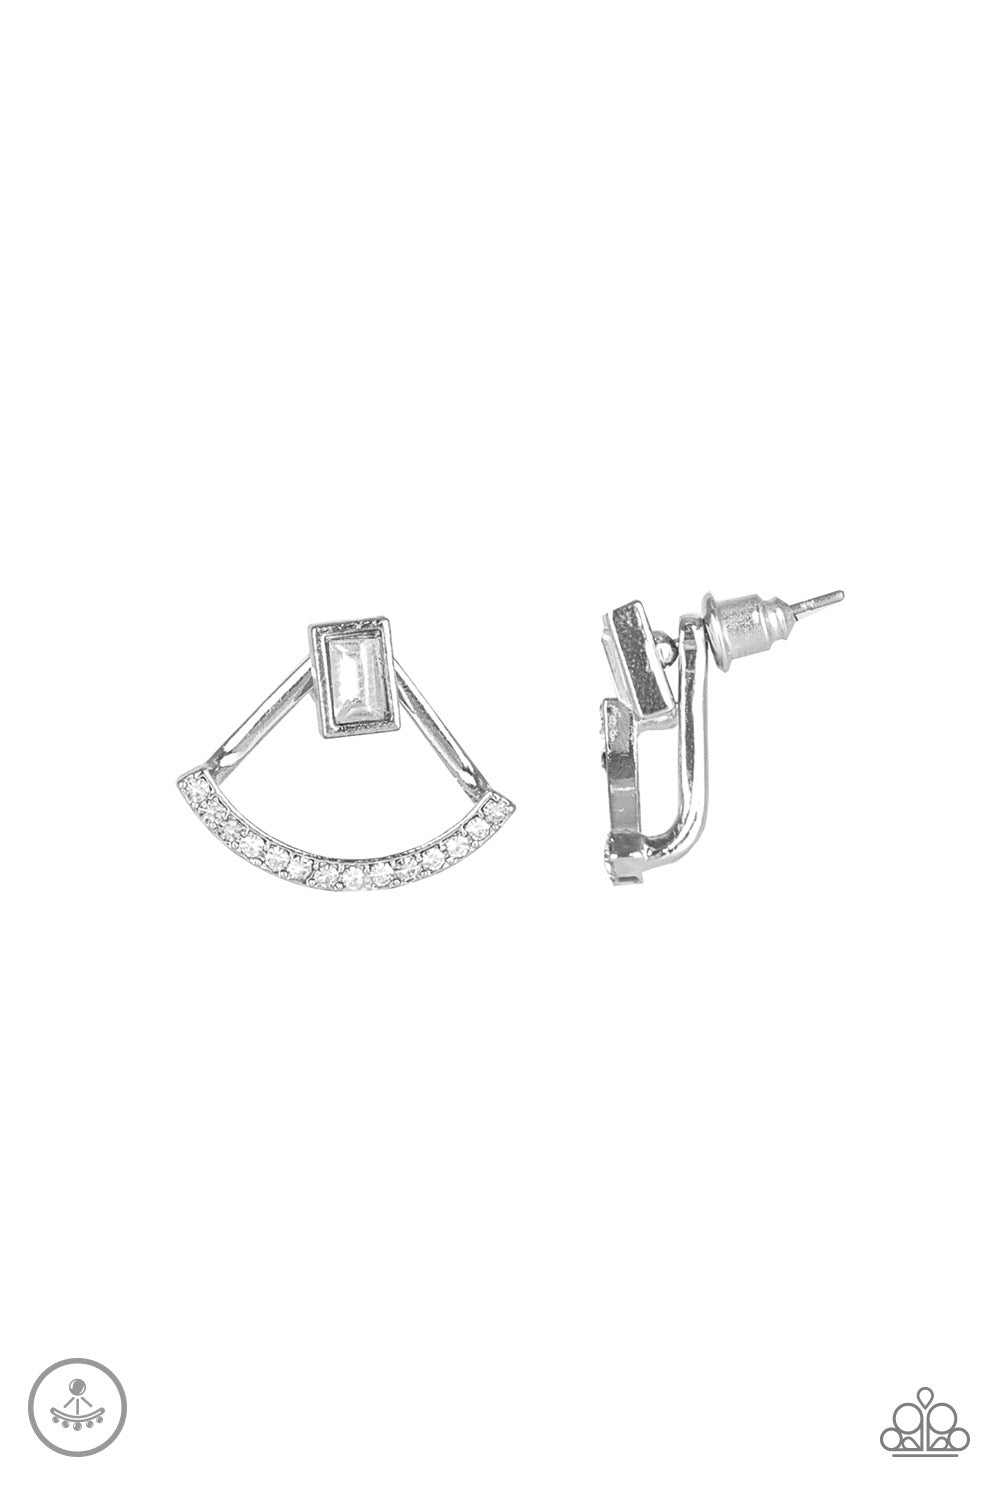 A solitaire emerald-cut rhinestone attaches to a double-sided post, designed to fasten behind the ear. Radiating with a bowing row of white rhinestones, the double sided-post peeks out beneath the ear for an edgy look. Earring attaches to a standard post fitting.